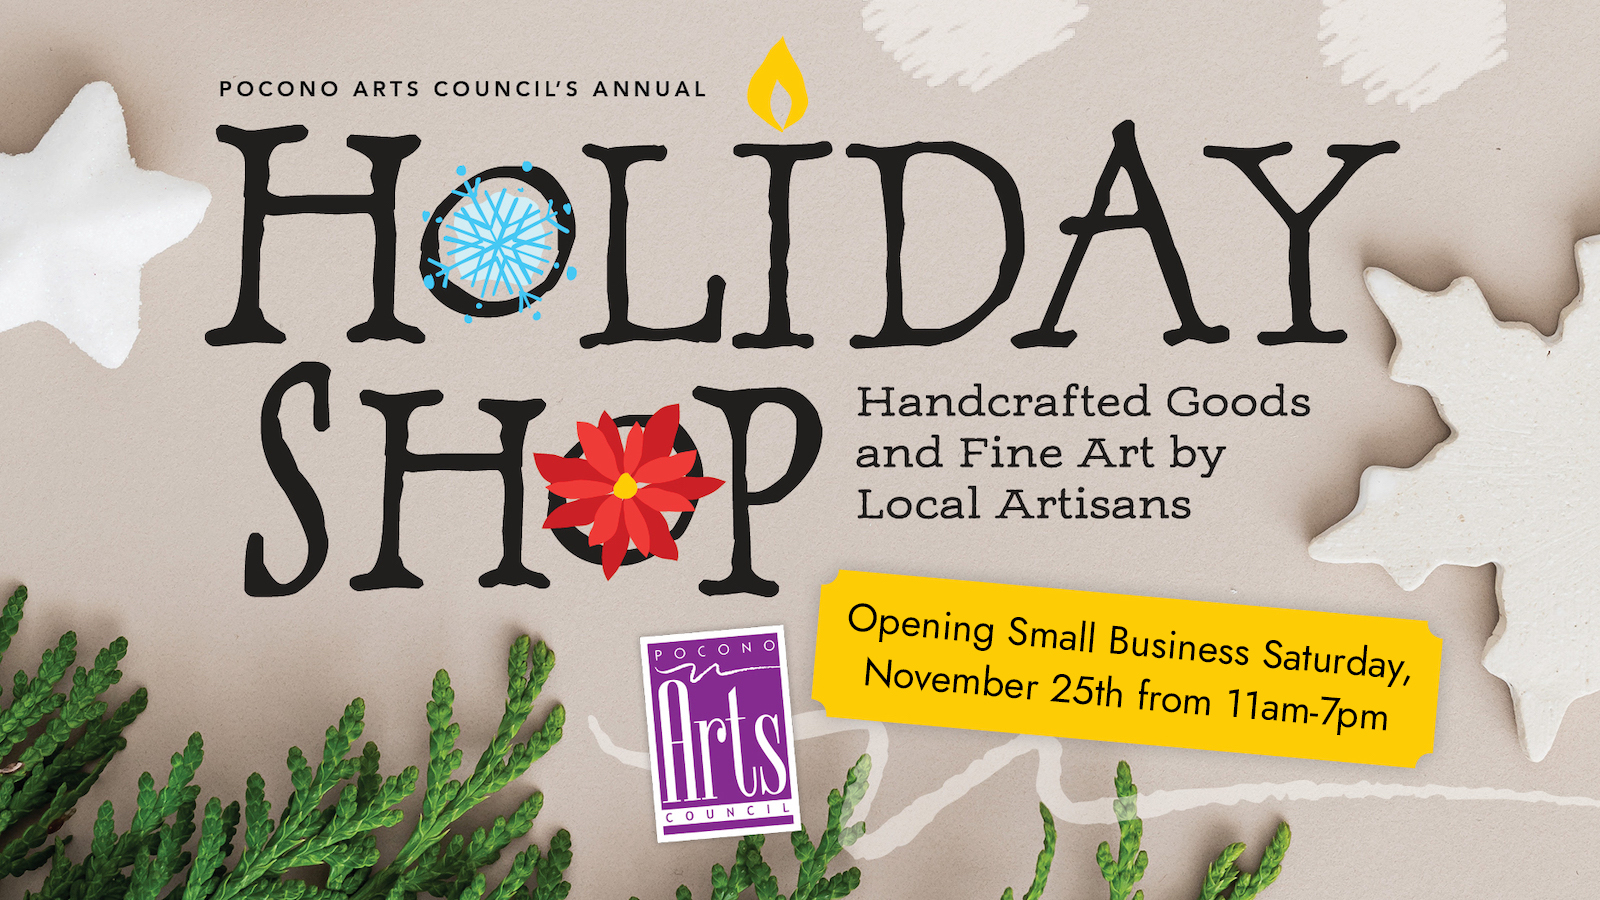 Holiday Shop: Handcrafted Goods and Fine Art by Local Artisans